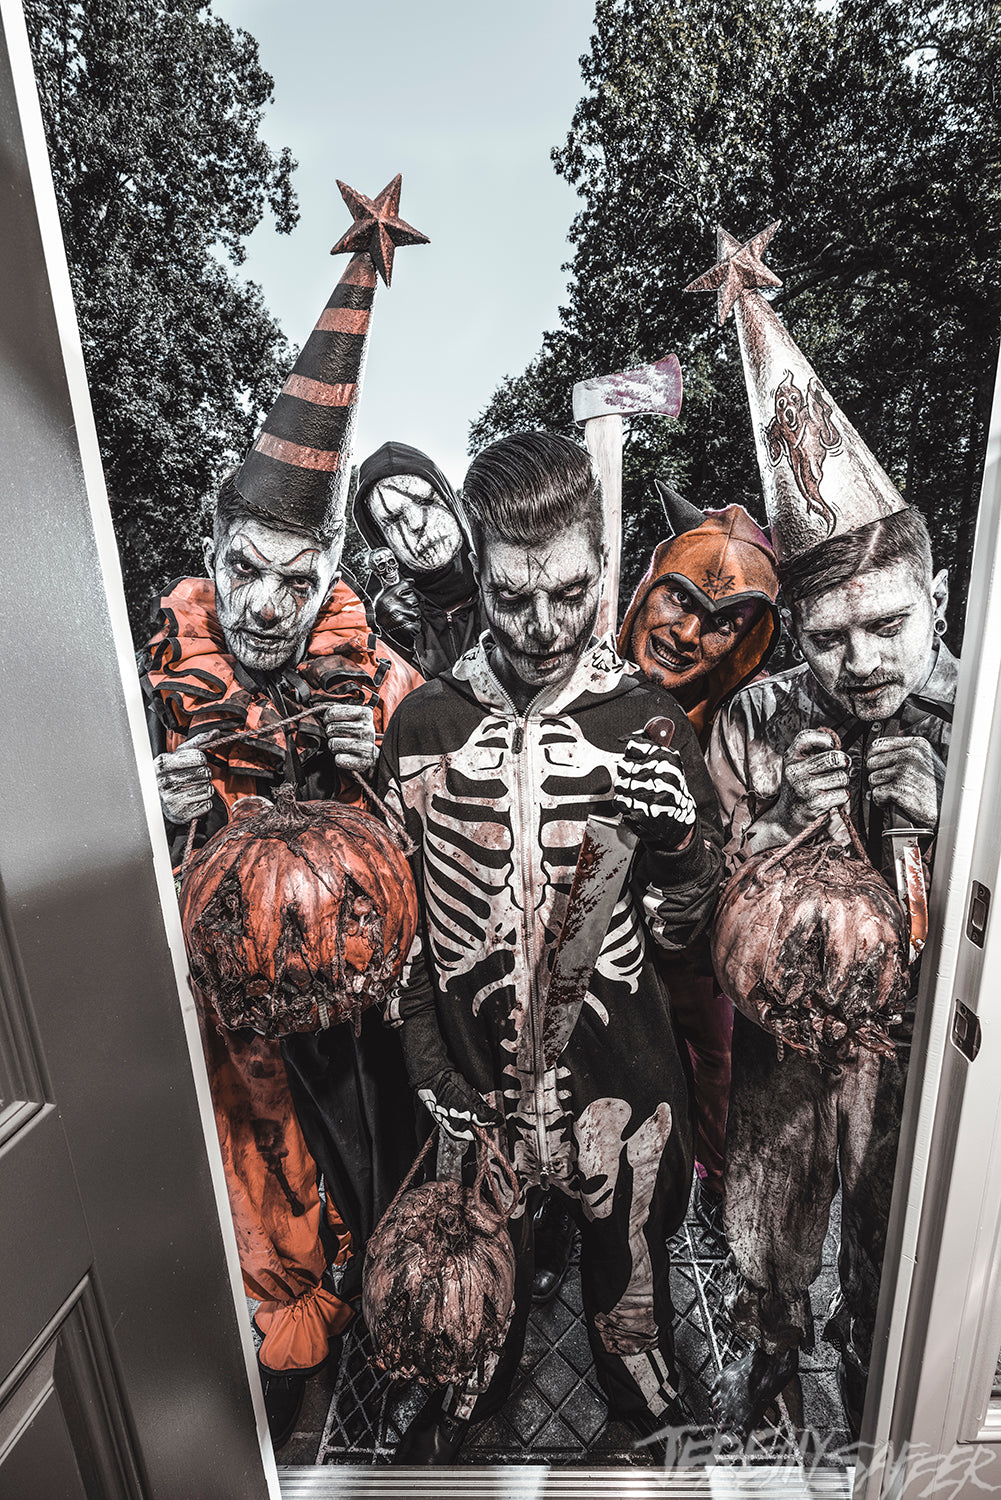 Ice Nine Kills - Trick or Treat 8x12 - (silver scream pearl edition) only 1 left!